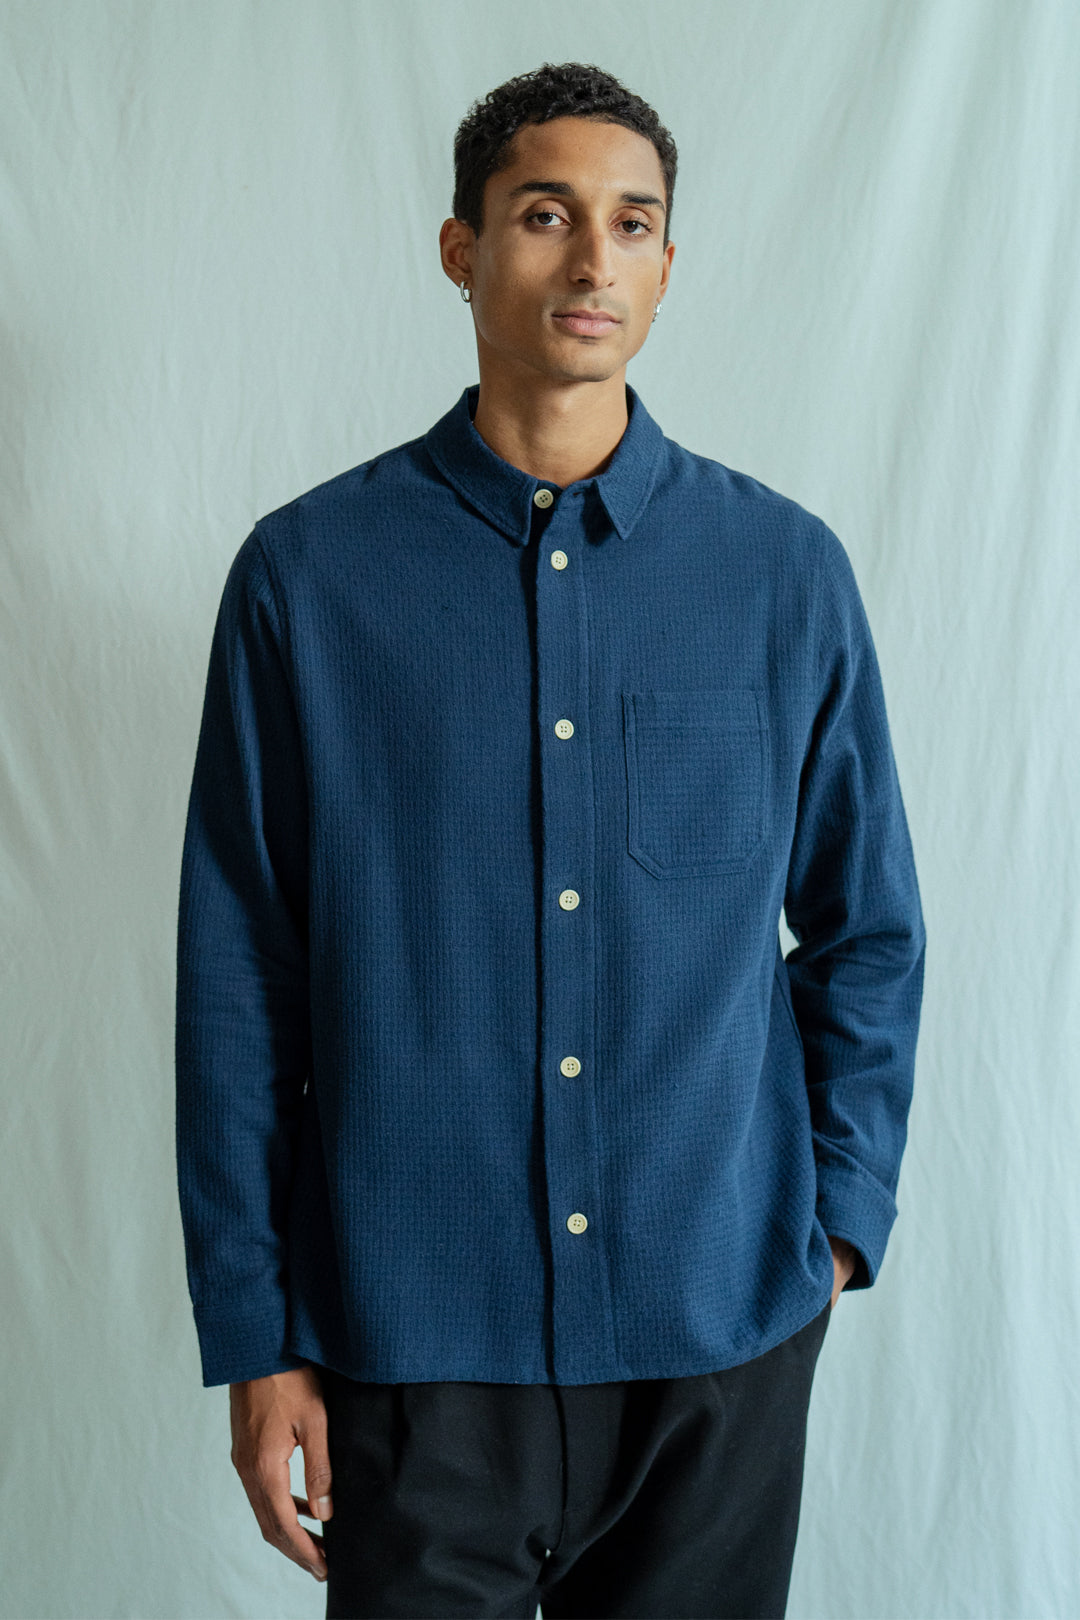 Dark blue shirt made from 100% organic cotton from Rotholz